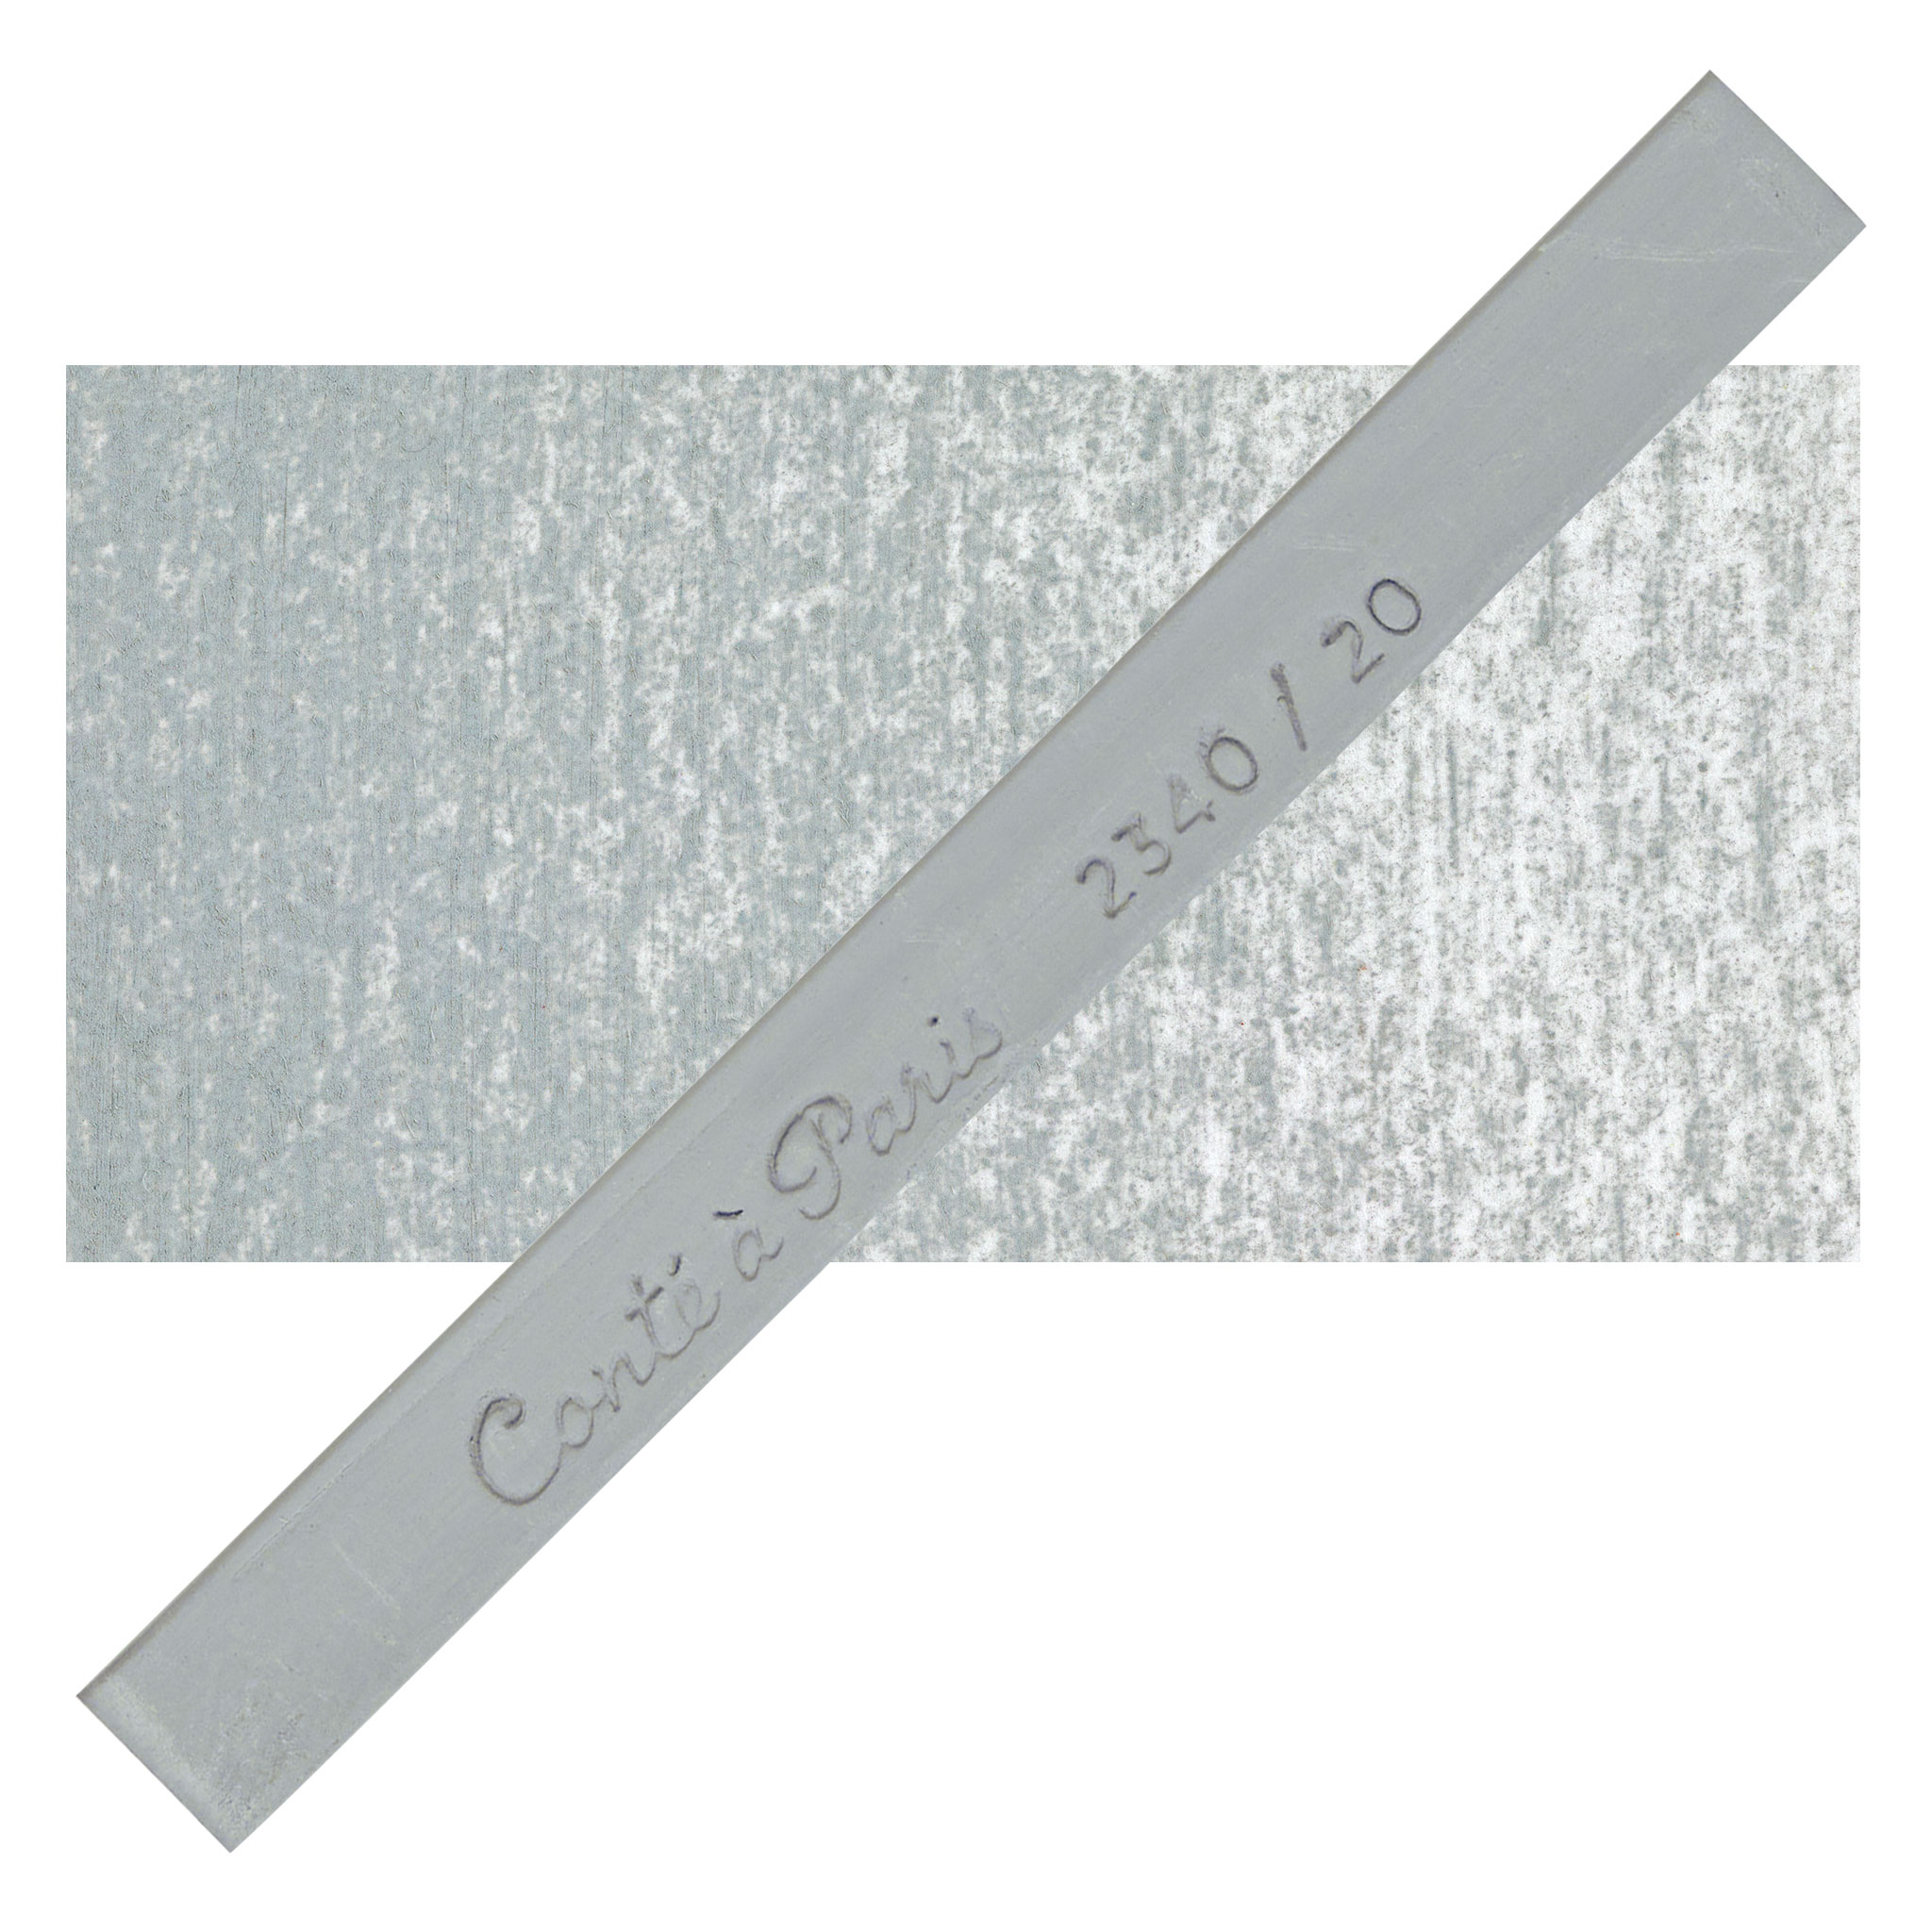 Conte Crayon 2 Pack White 2B